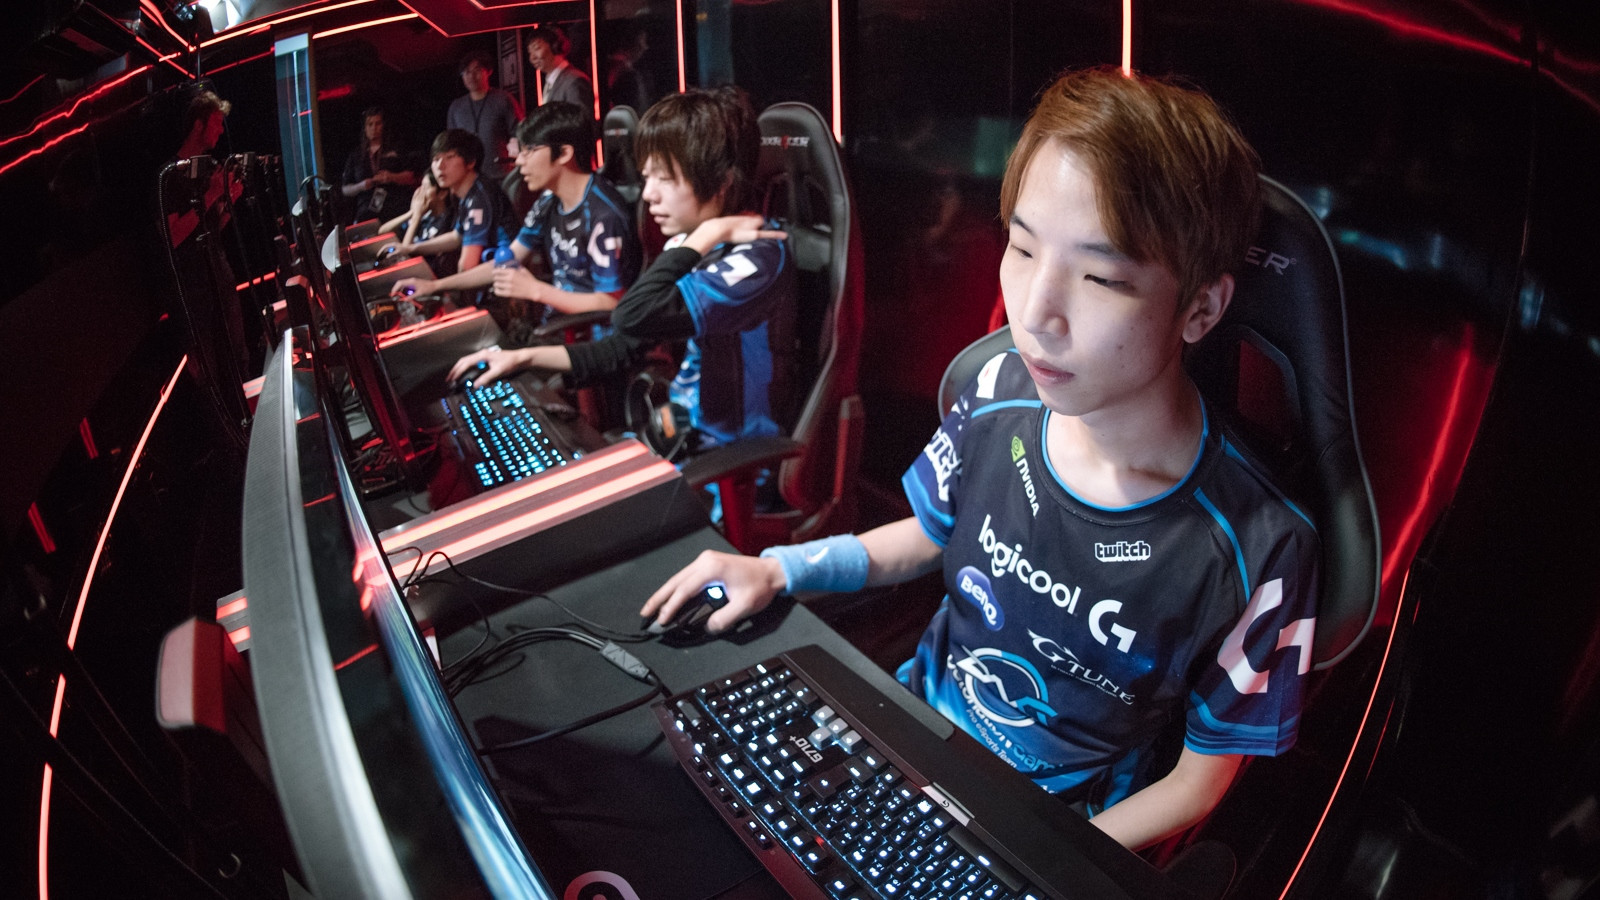 Speculation has begun over possible esports engagement with Tokyo 2020 ©Getty Images